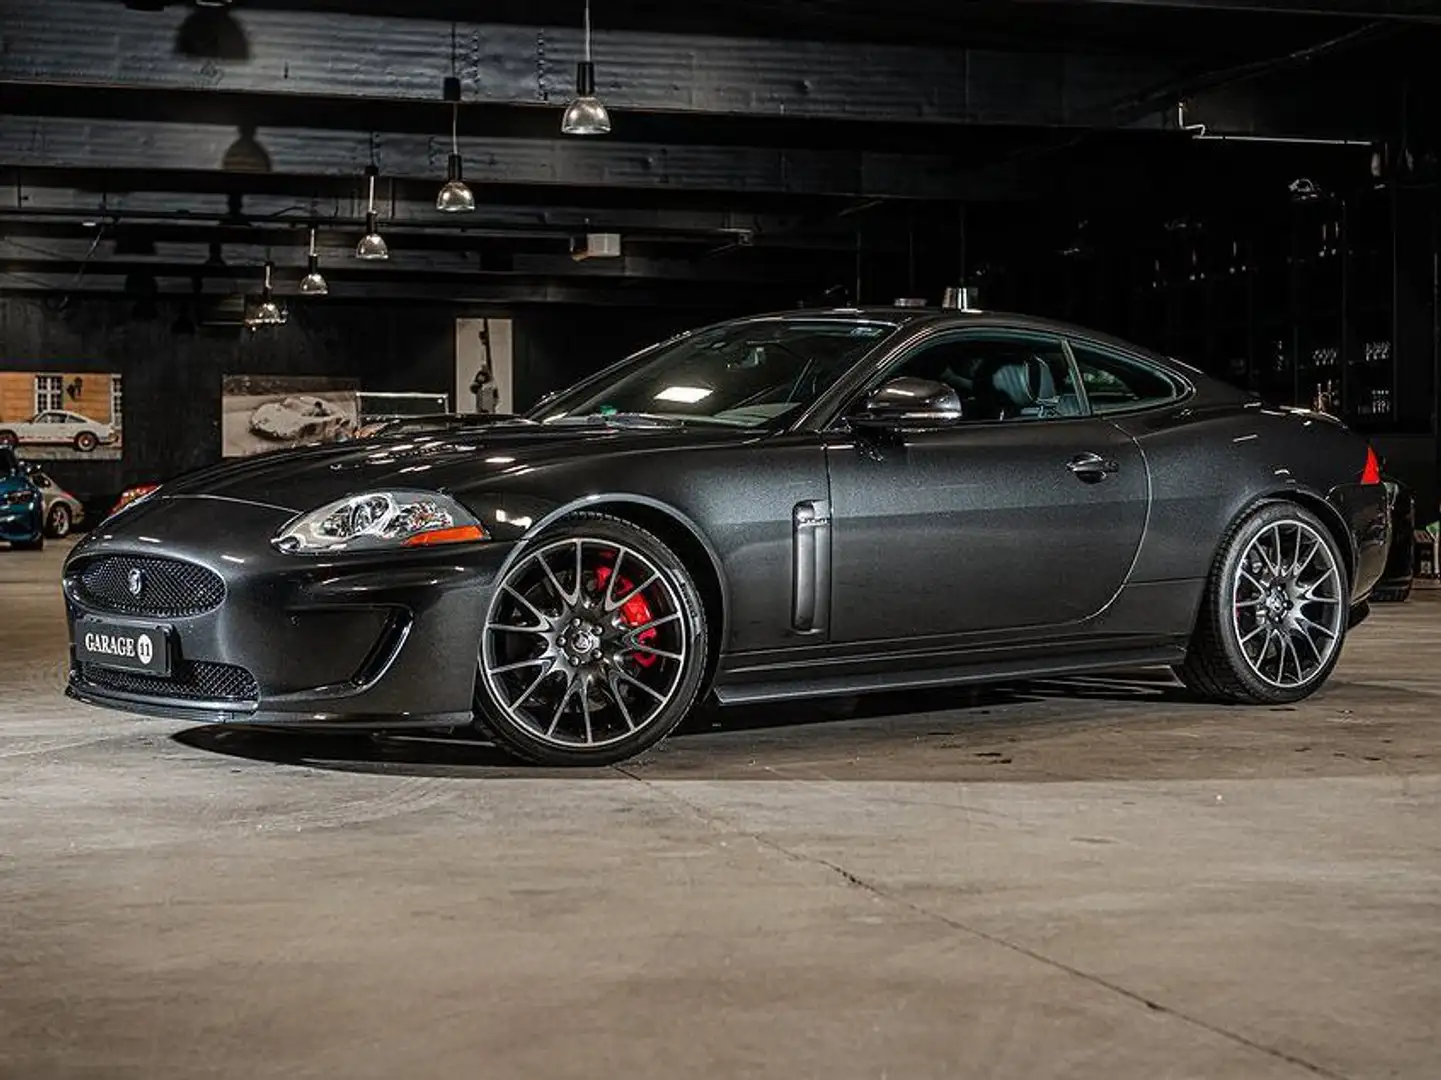 Jaguar XKR 75 Limited Edition 5.0 V8 530 ch - One of 75 siva - 2